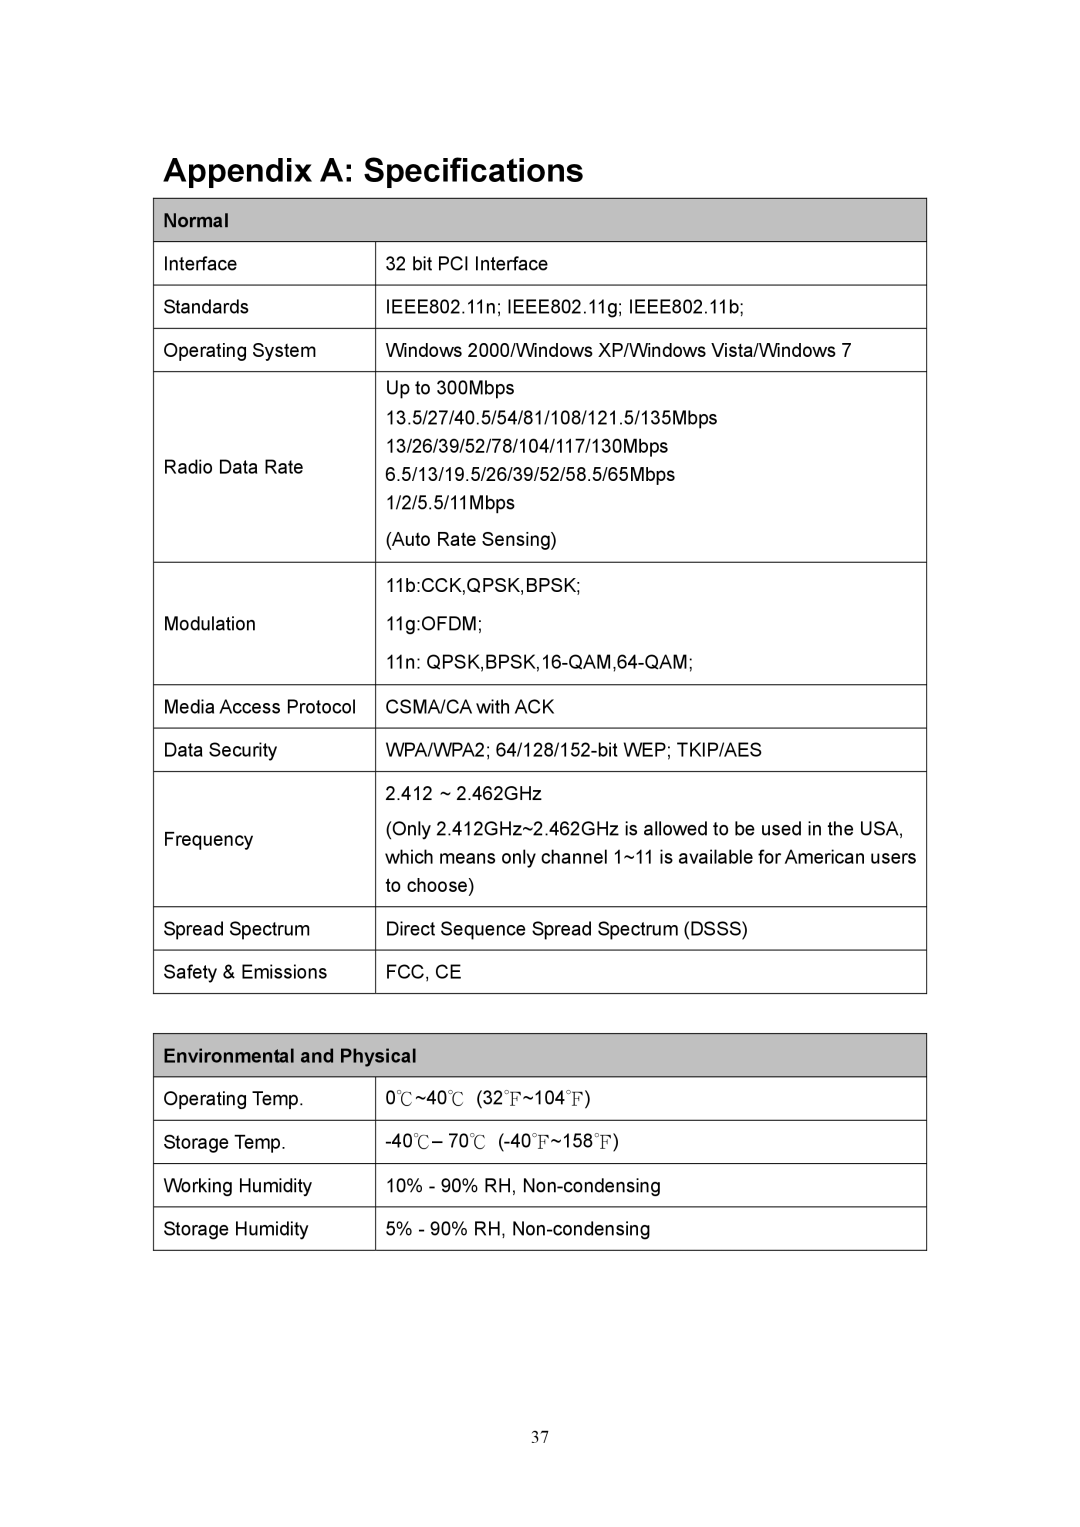 Rosewill RNX-N360PC user manual Appendix a Specifications, Normal, Environmental and Physical 